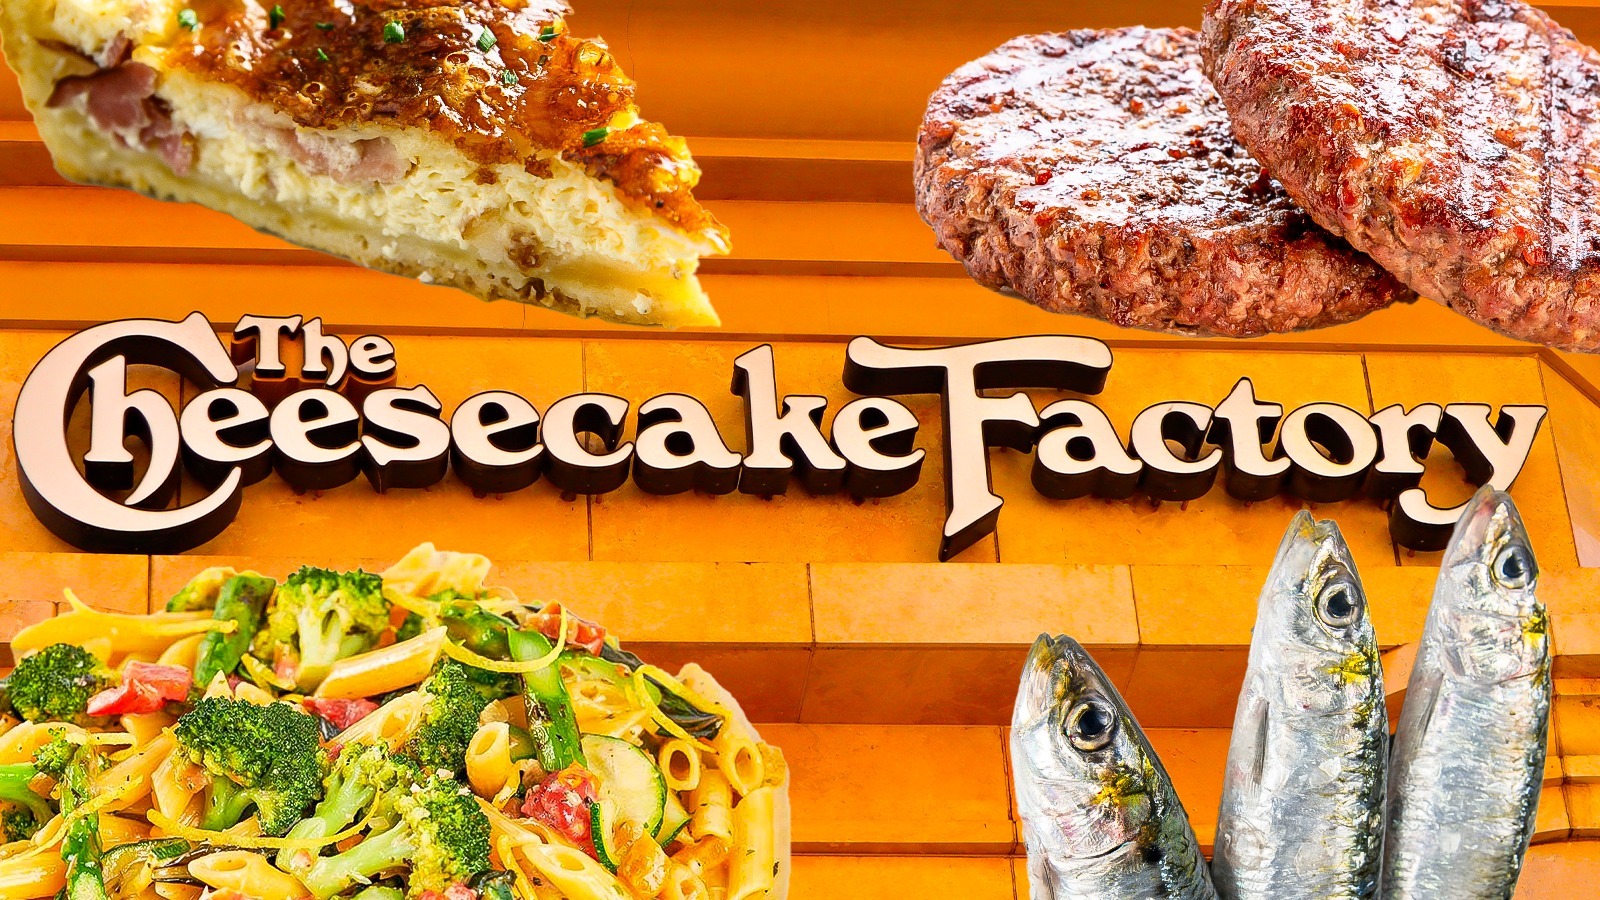 Cheesecake Factory $10 Gift Card US